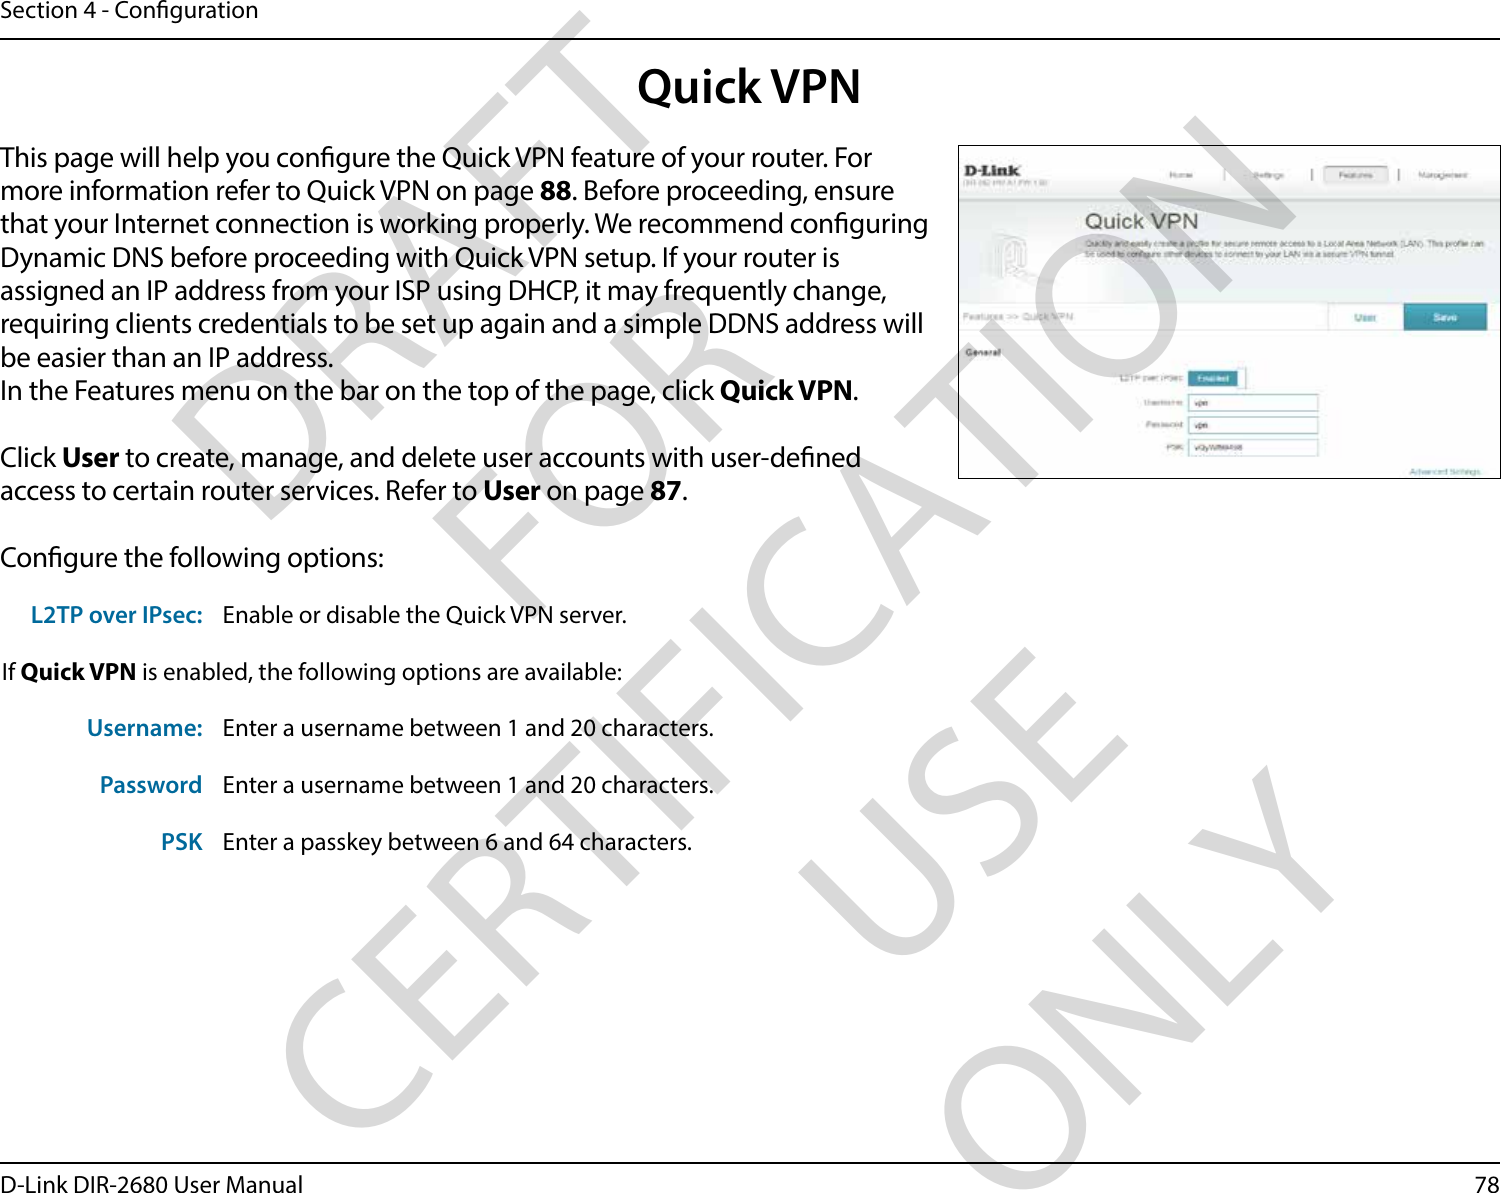 78D-Link DIR-2680 User ManualSection 4 - CongurationQuick VPNThis page will help you congure the Quick VPN feature of your router. For more information refer to Quick VPN on page 88. Before proceeding, ensure that your Internet connection is working properly. We recommend conguring Dynamic DNS before proceeding with Quick VPN setup. If your router is assigned an IP address from your ISP using DHCP, it may frequently change, requiring clients credentials to be set up again and a simple DDNS address will be easier than an IP address.In the Features menu on the bar on the top of the page, click Quick VPN.Click User to create, manage, and delete user accounts with user-dened access to certain router services. Refer to User on page 87.Congure the following options:L2TP over IPsec: Enable or disable the Quick VPN server.If Quick VPN is enabled, the following options are available:Username: Enter a username between 1 and 20 characters.Password Enter a username between 1 and 20 characters.PSK Enter a passkey between 6 and 64 characters.DRAFT FOR CERTIFICATION USE ONLY